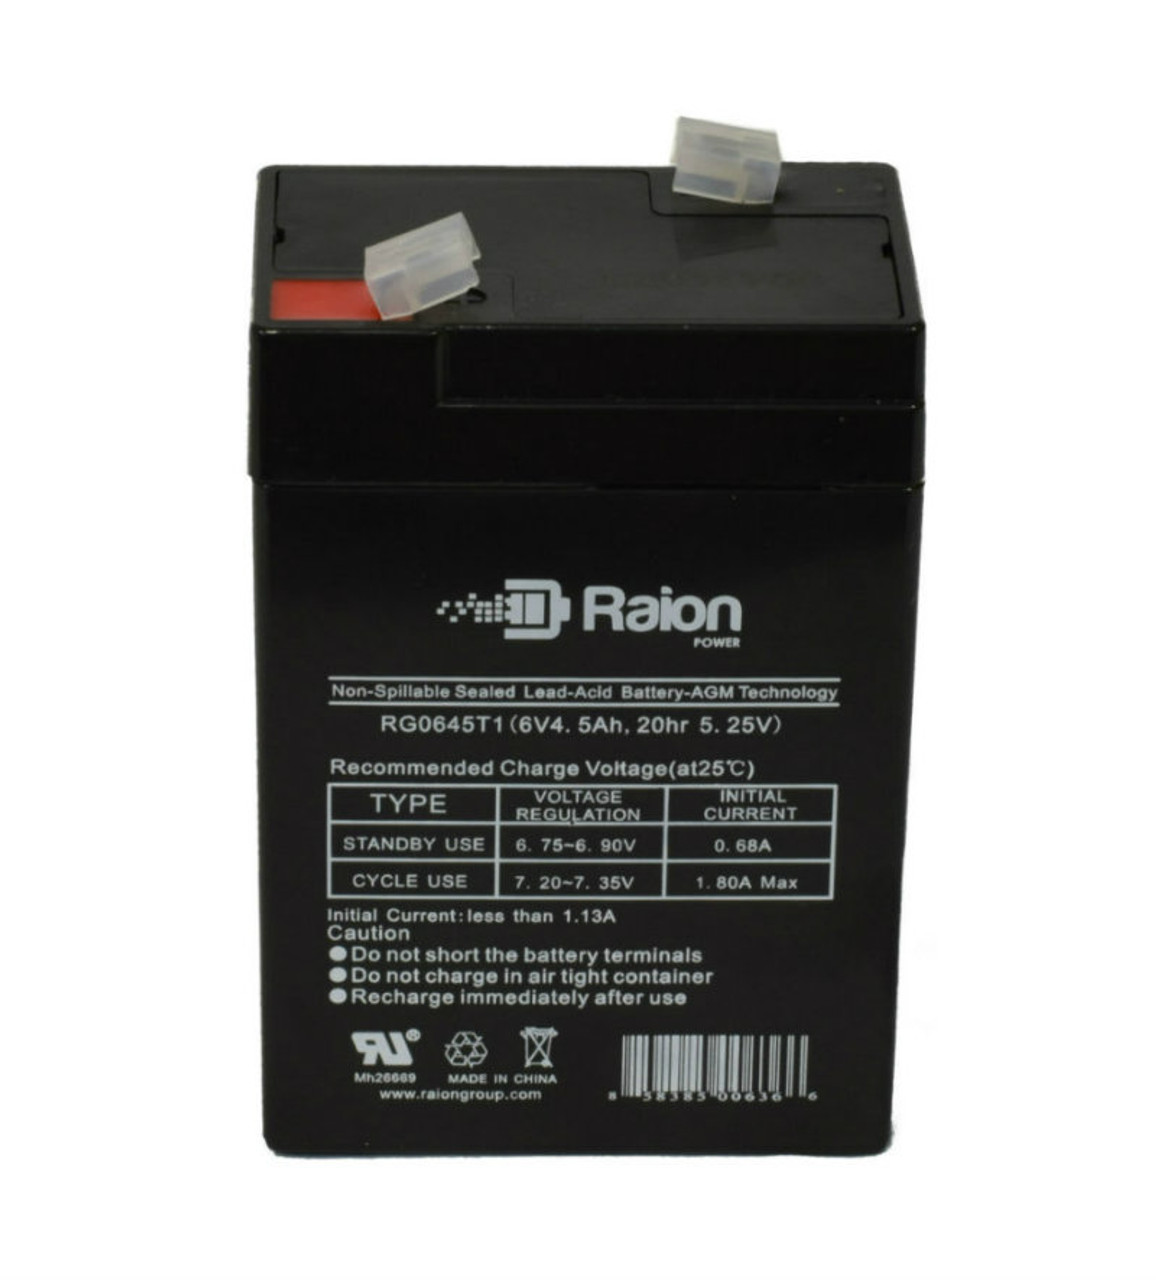 Raion Power RG0645T1 Replacement Battery Cartridge for Welch Allyn CP200 ECG